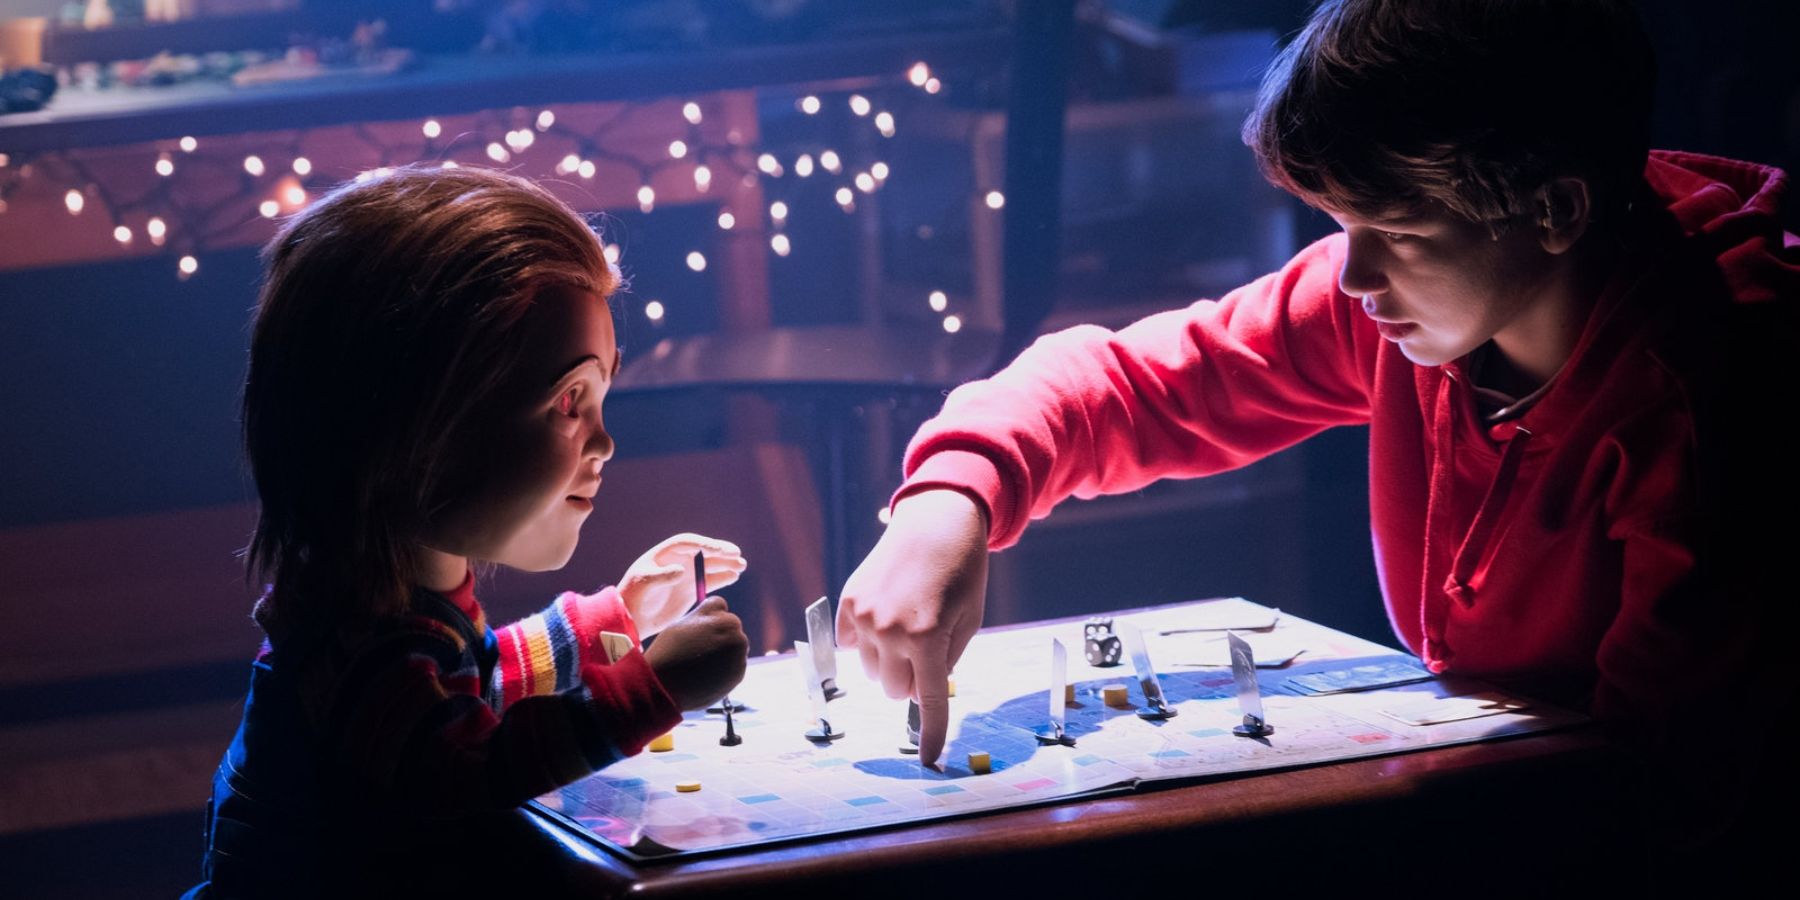 How to Fix MGM's Child's Play Reboot (Or, Chucky vs. Ralphie from